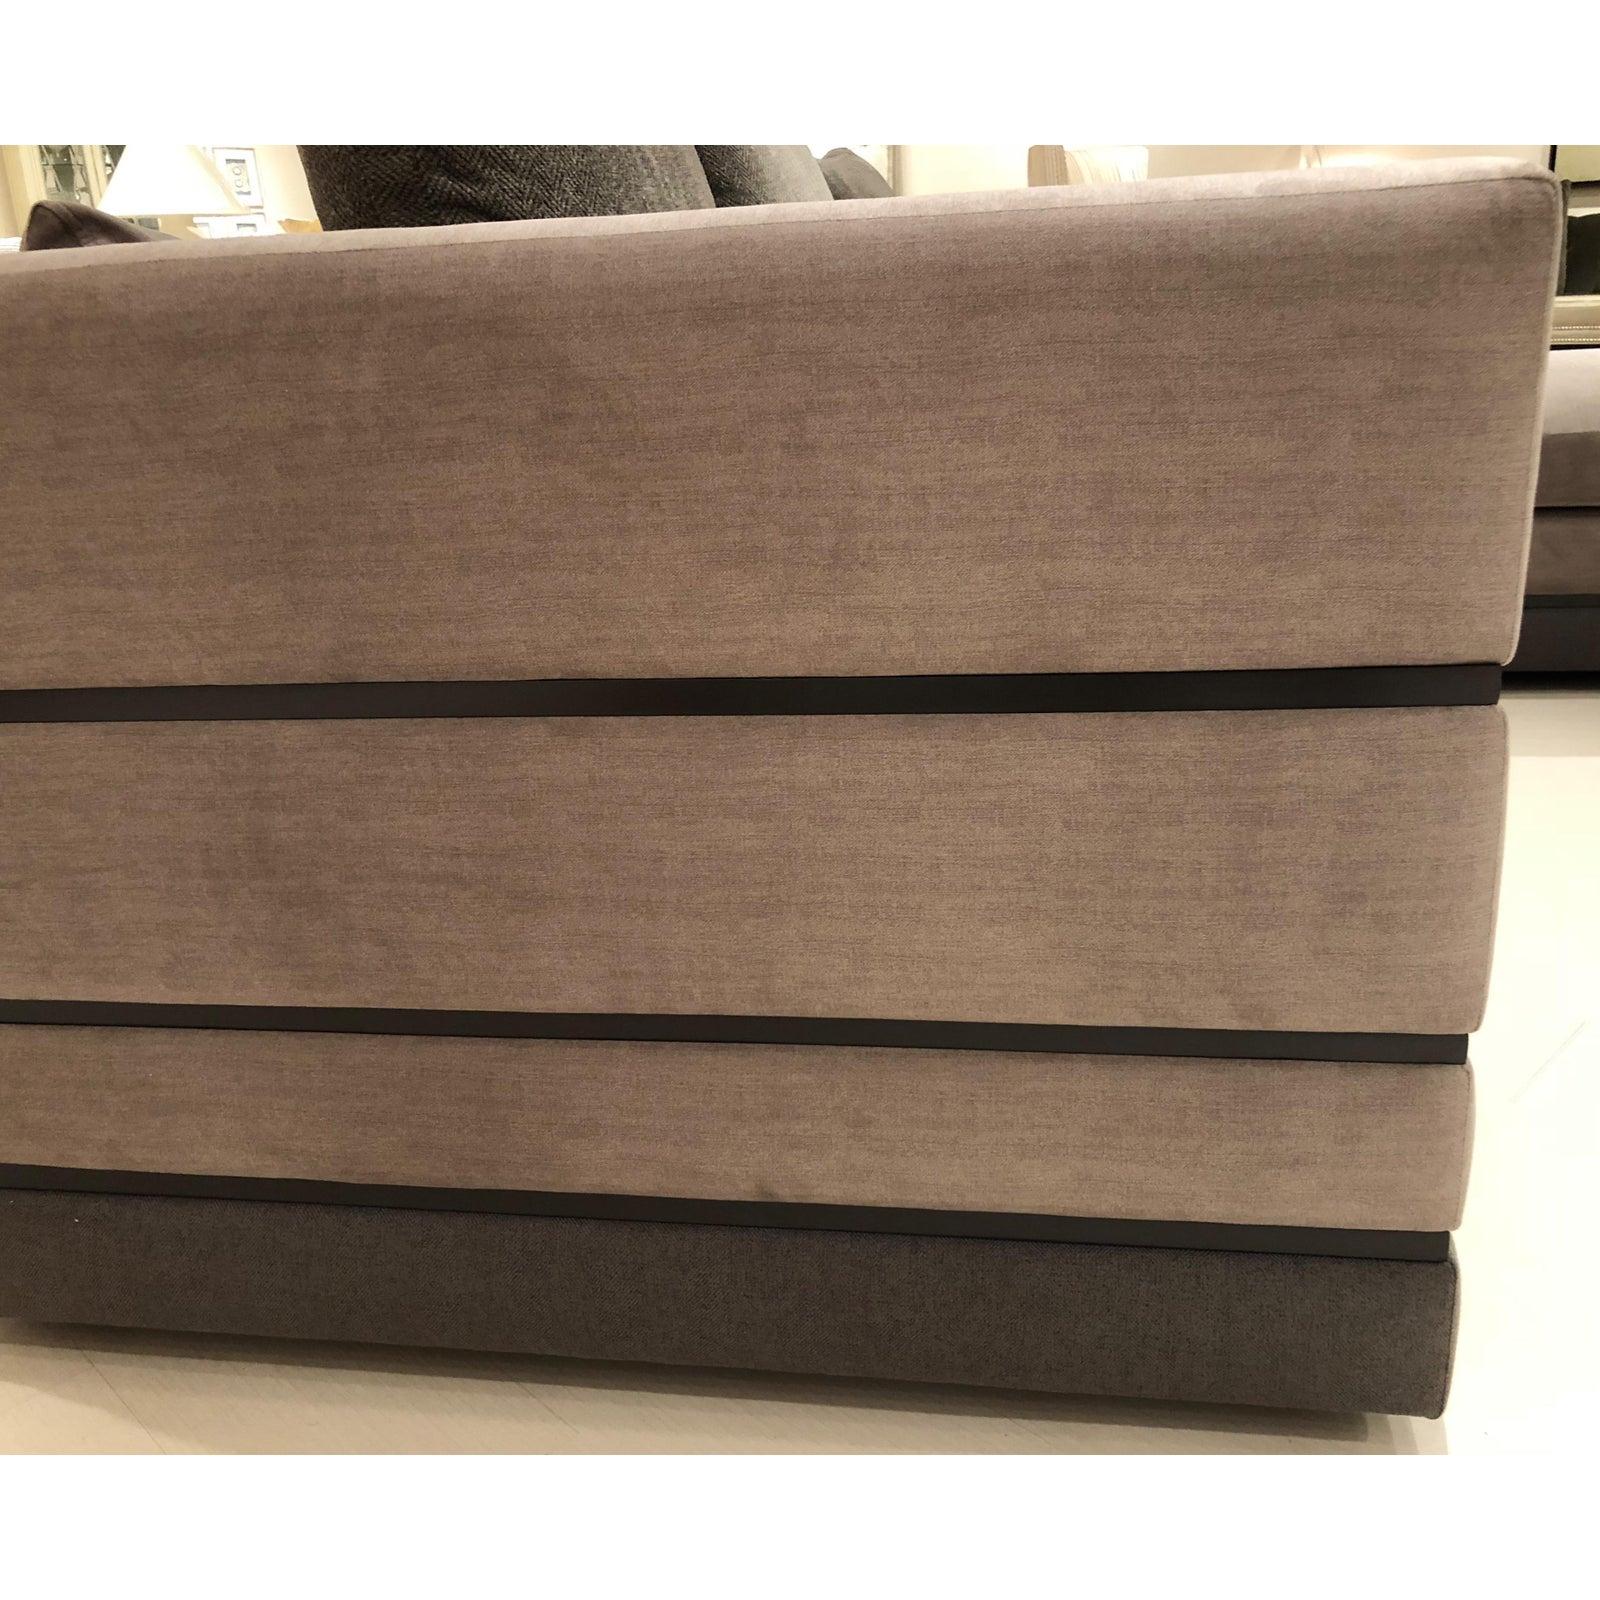 Nathan Anthony Modern Evok Sofa and Evok Bumper Ottoman In New Condition For Sale In Atlanta, GA